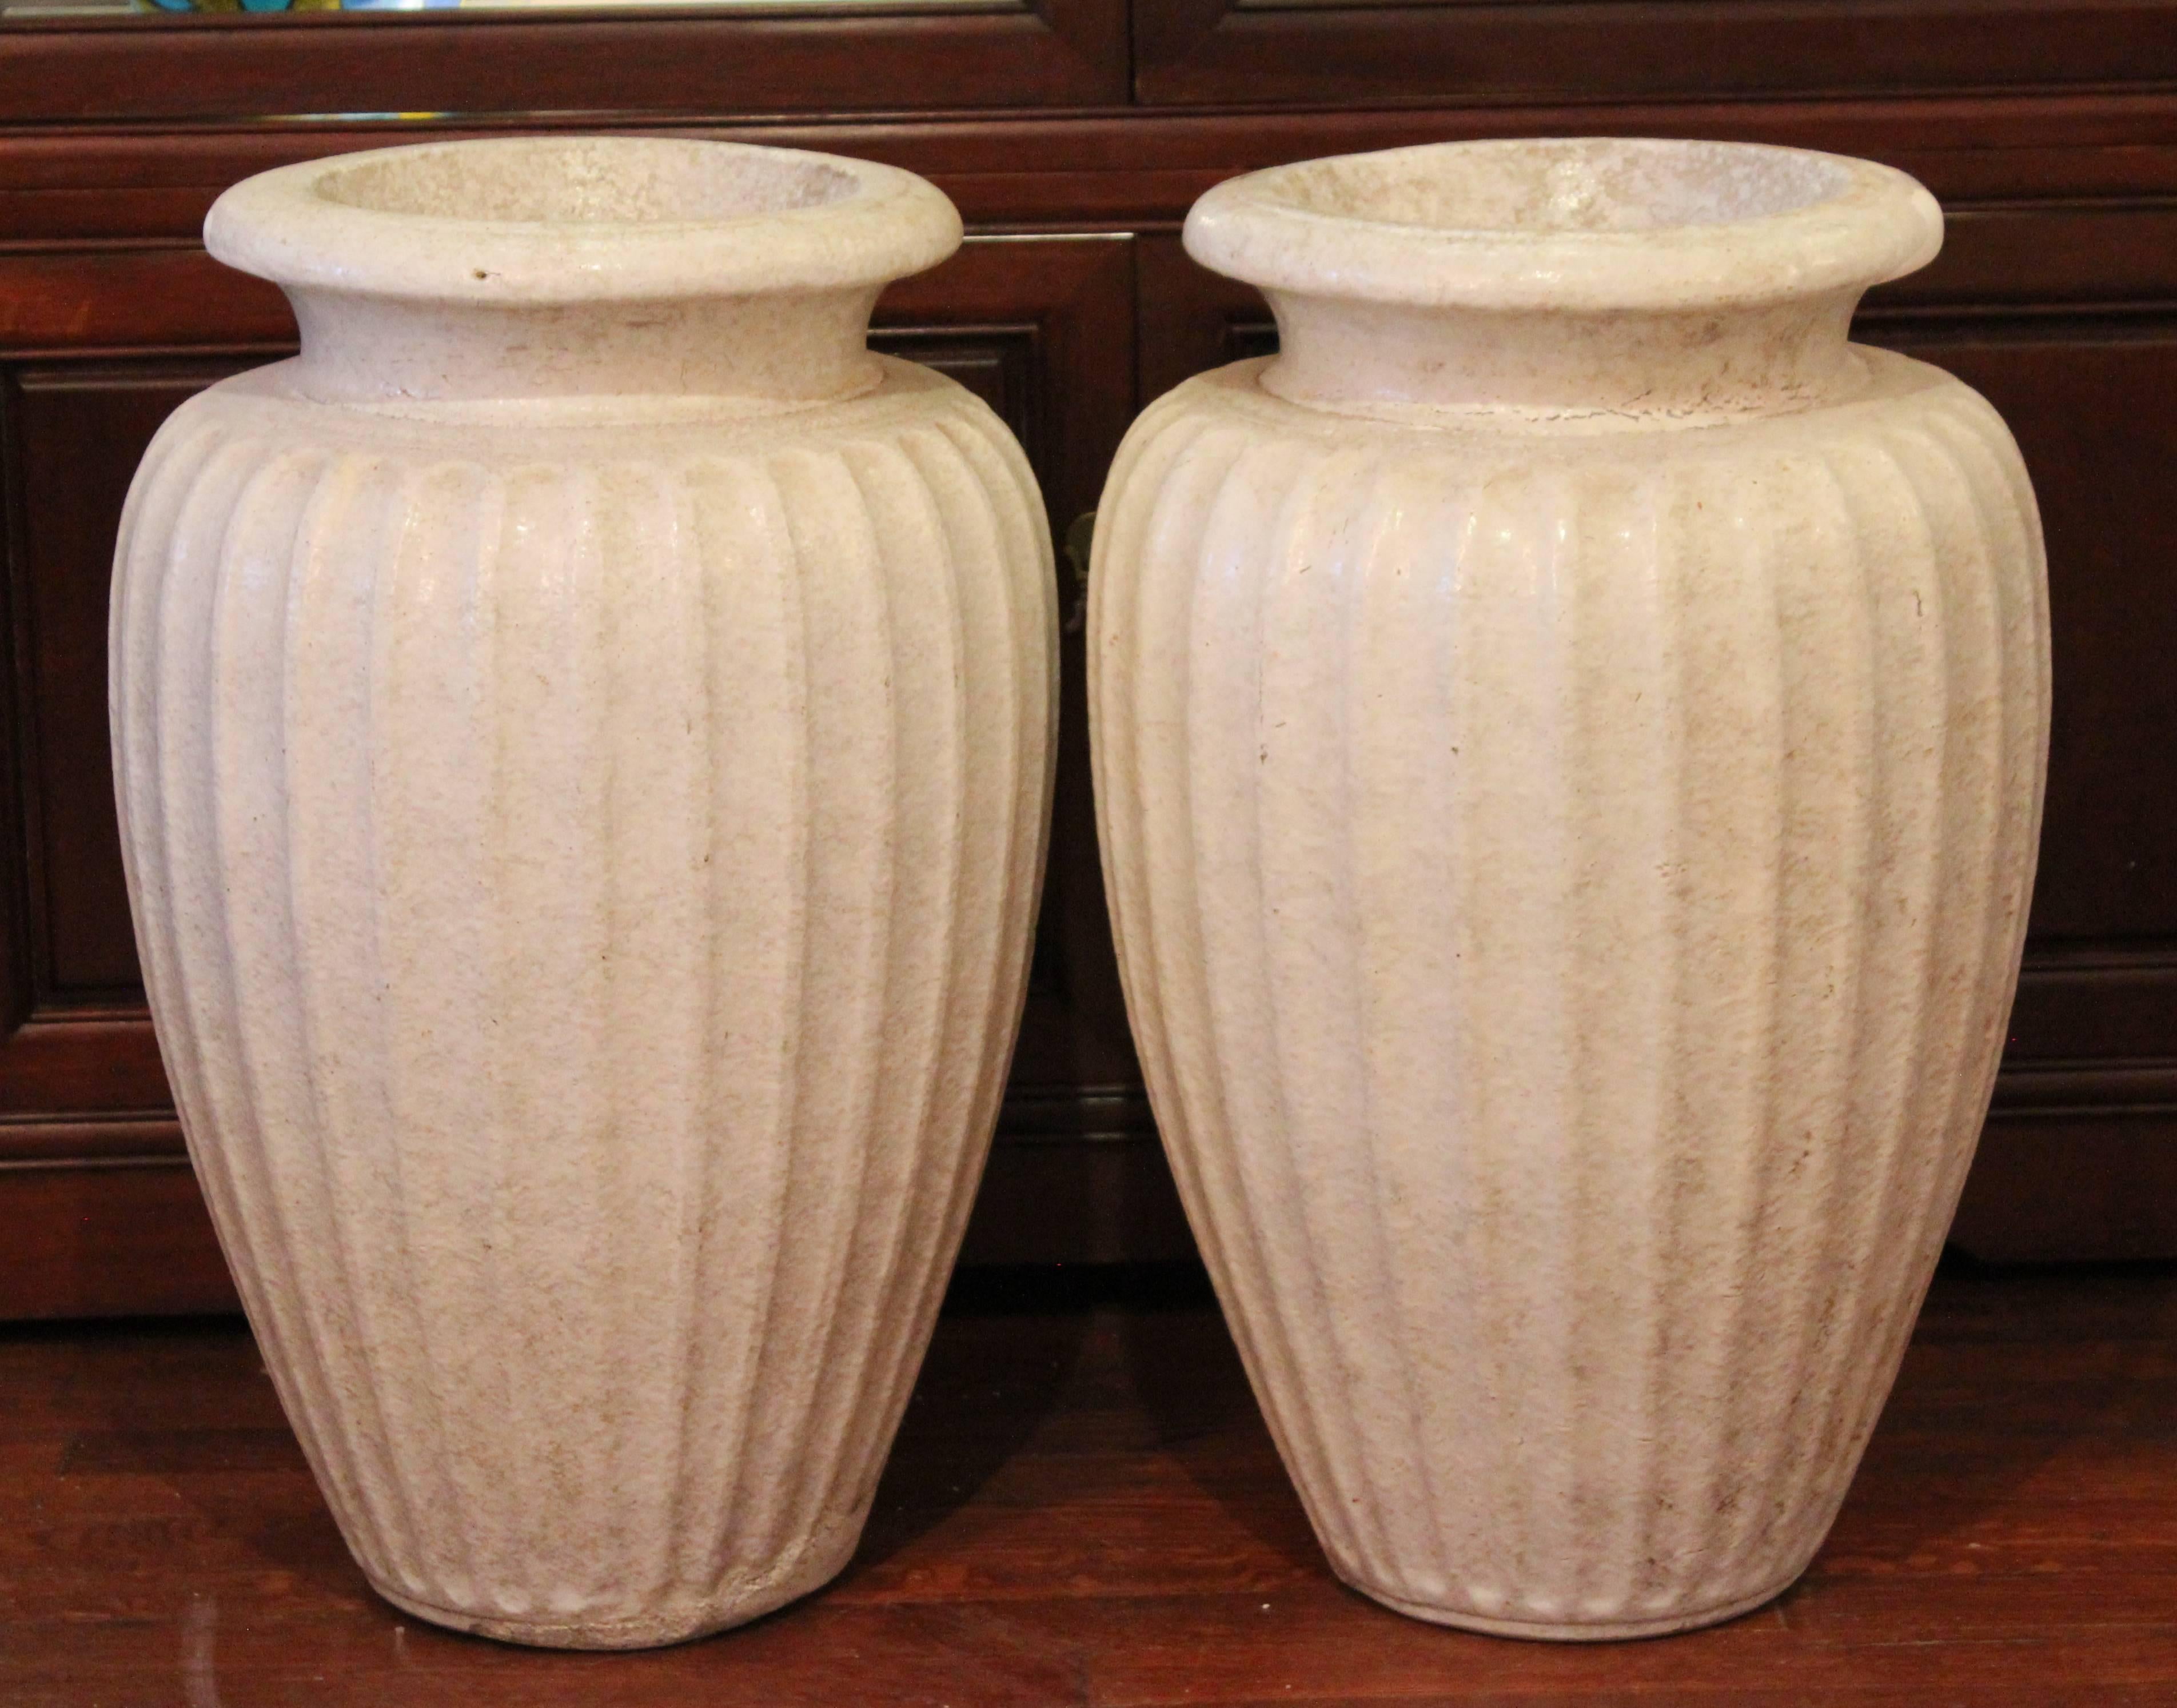 Large pair of fluted garden urns by the Galloway Terracotta Company of Philadelphia in classical form with great bone white wax matte glaze. Measures: 24